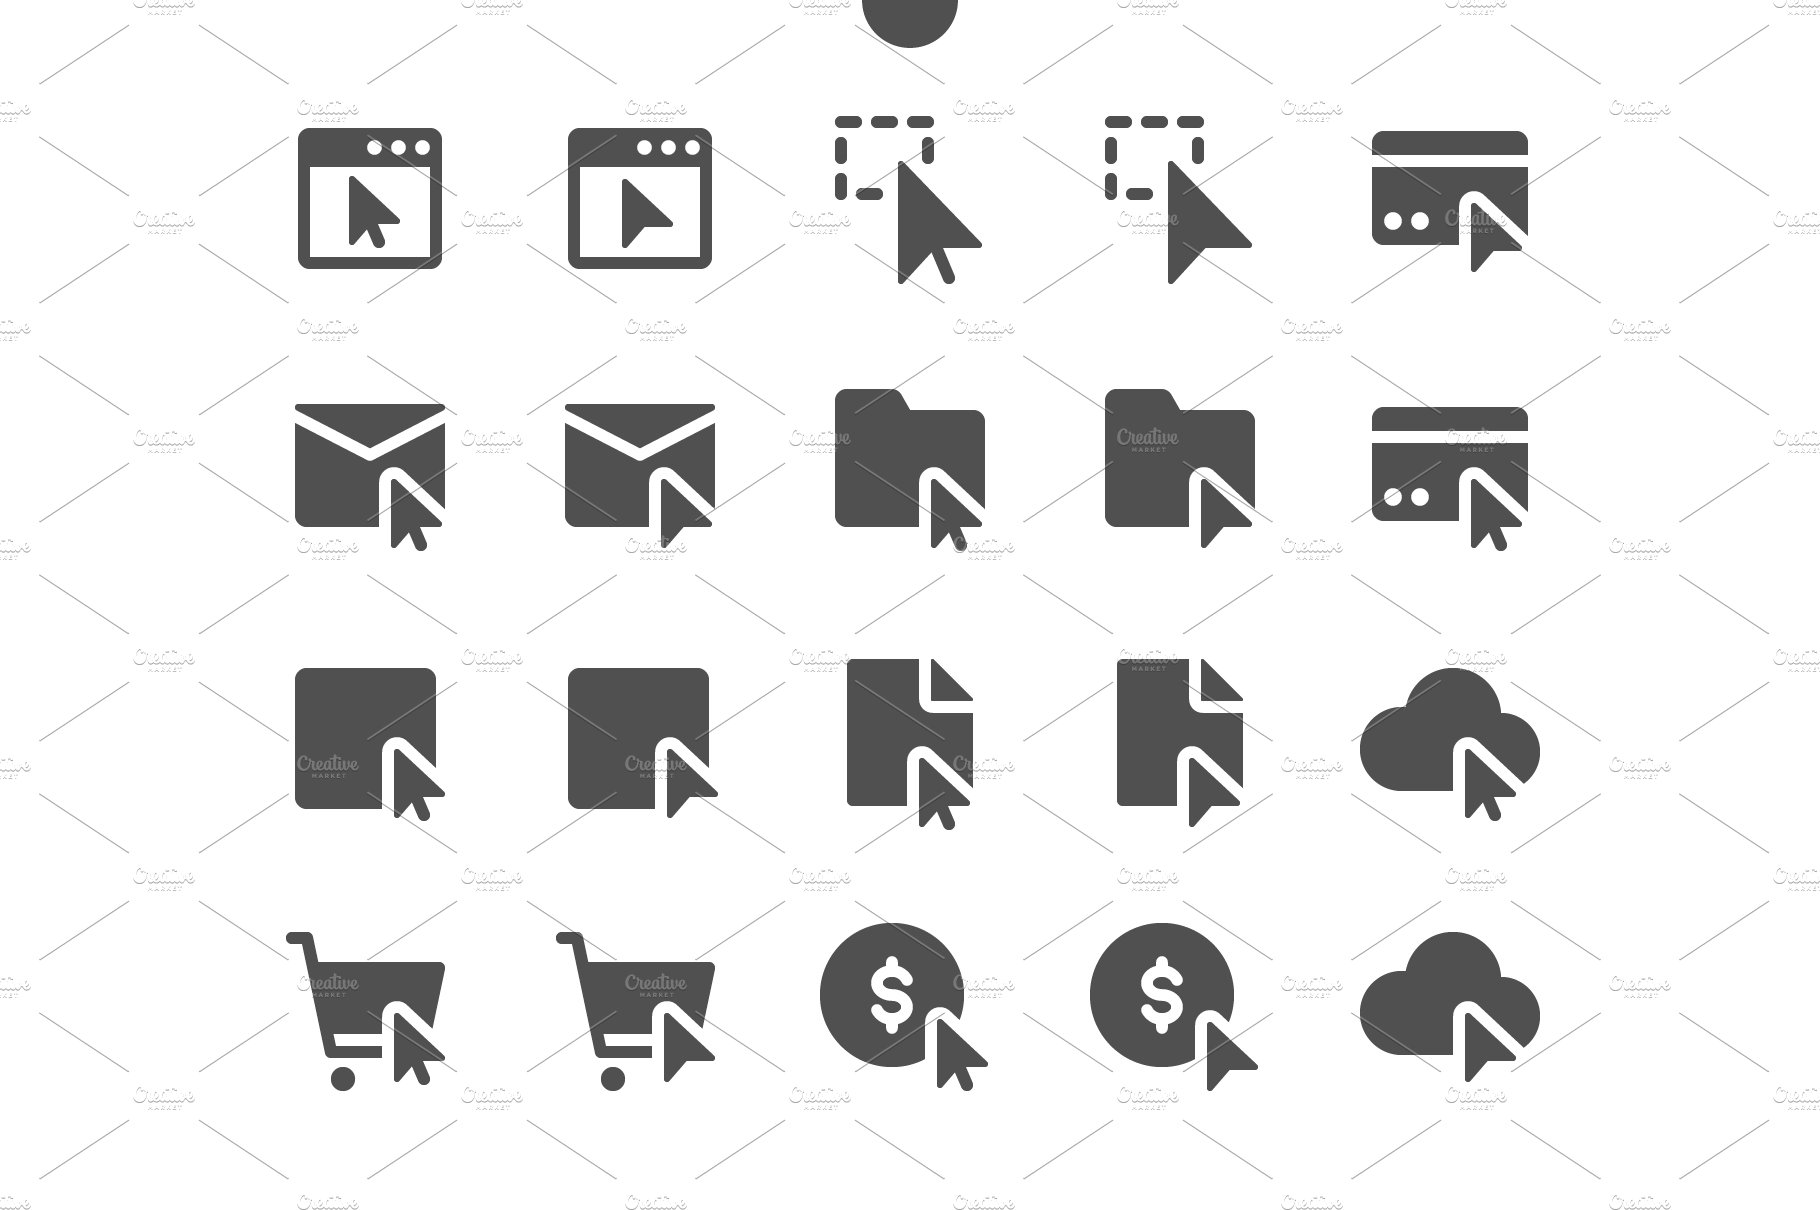 Selection & Cursors Icons cover image.